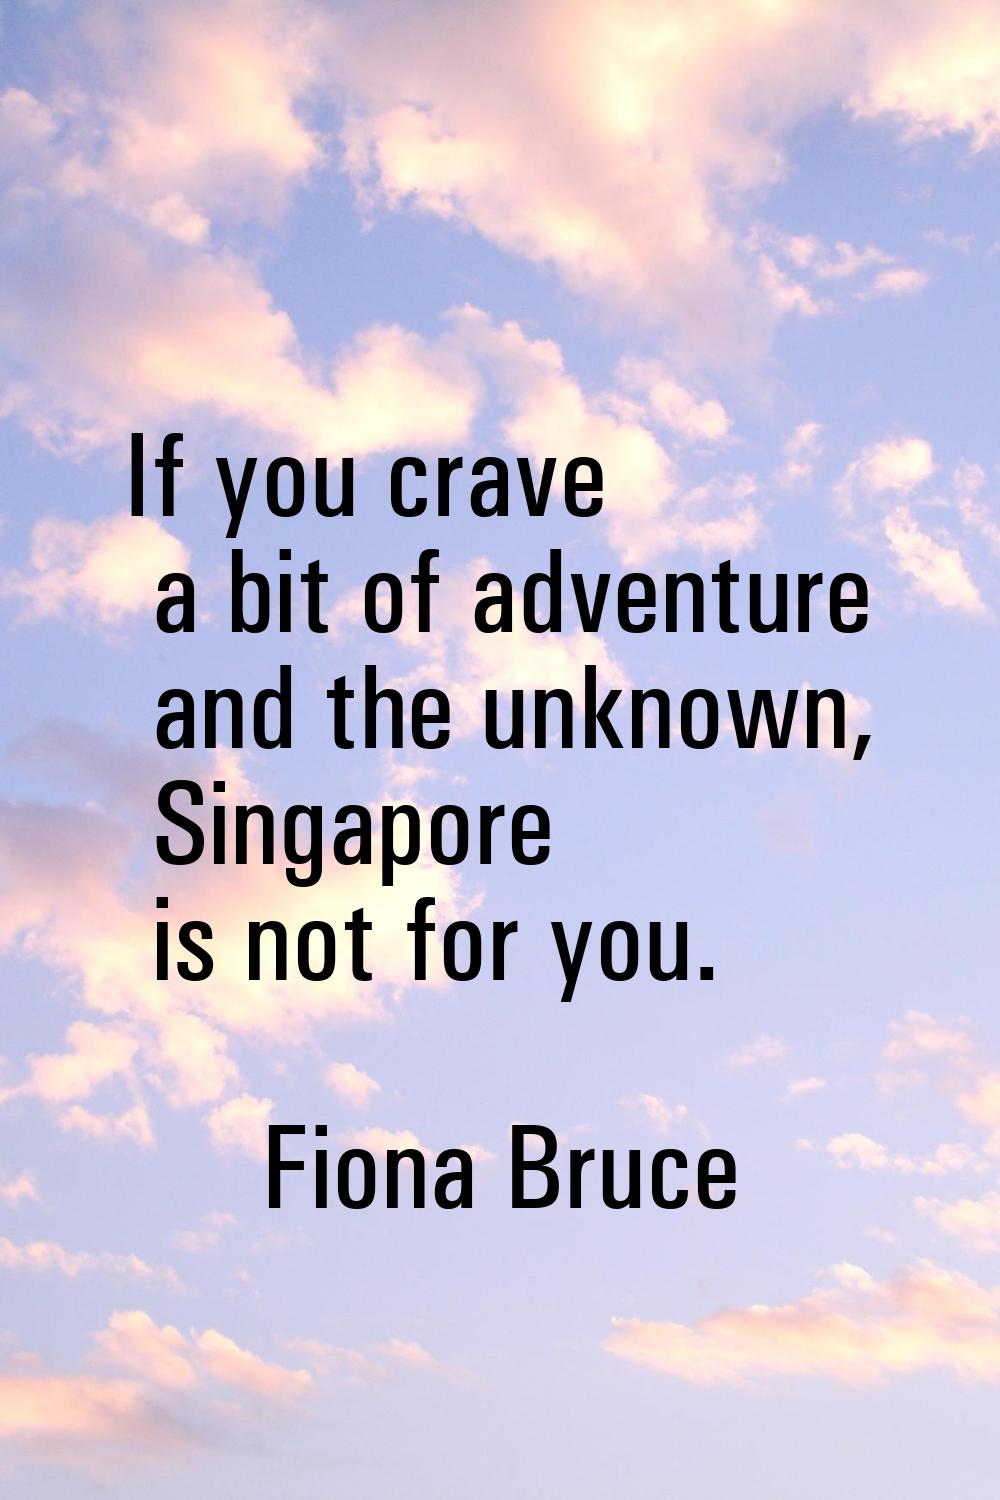 If you crave a bit of adventure and the unknown, Singapore is not for you.